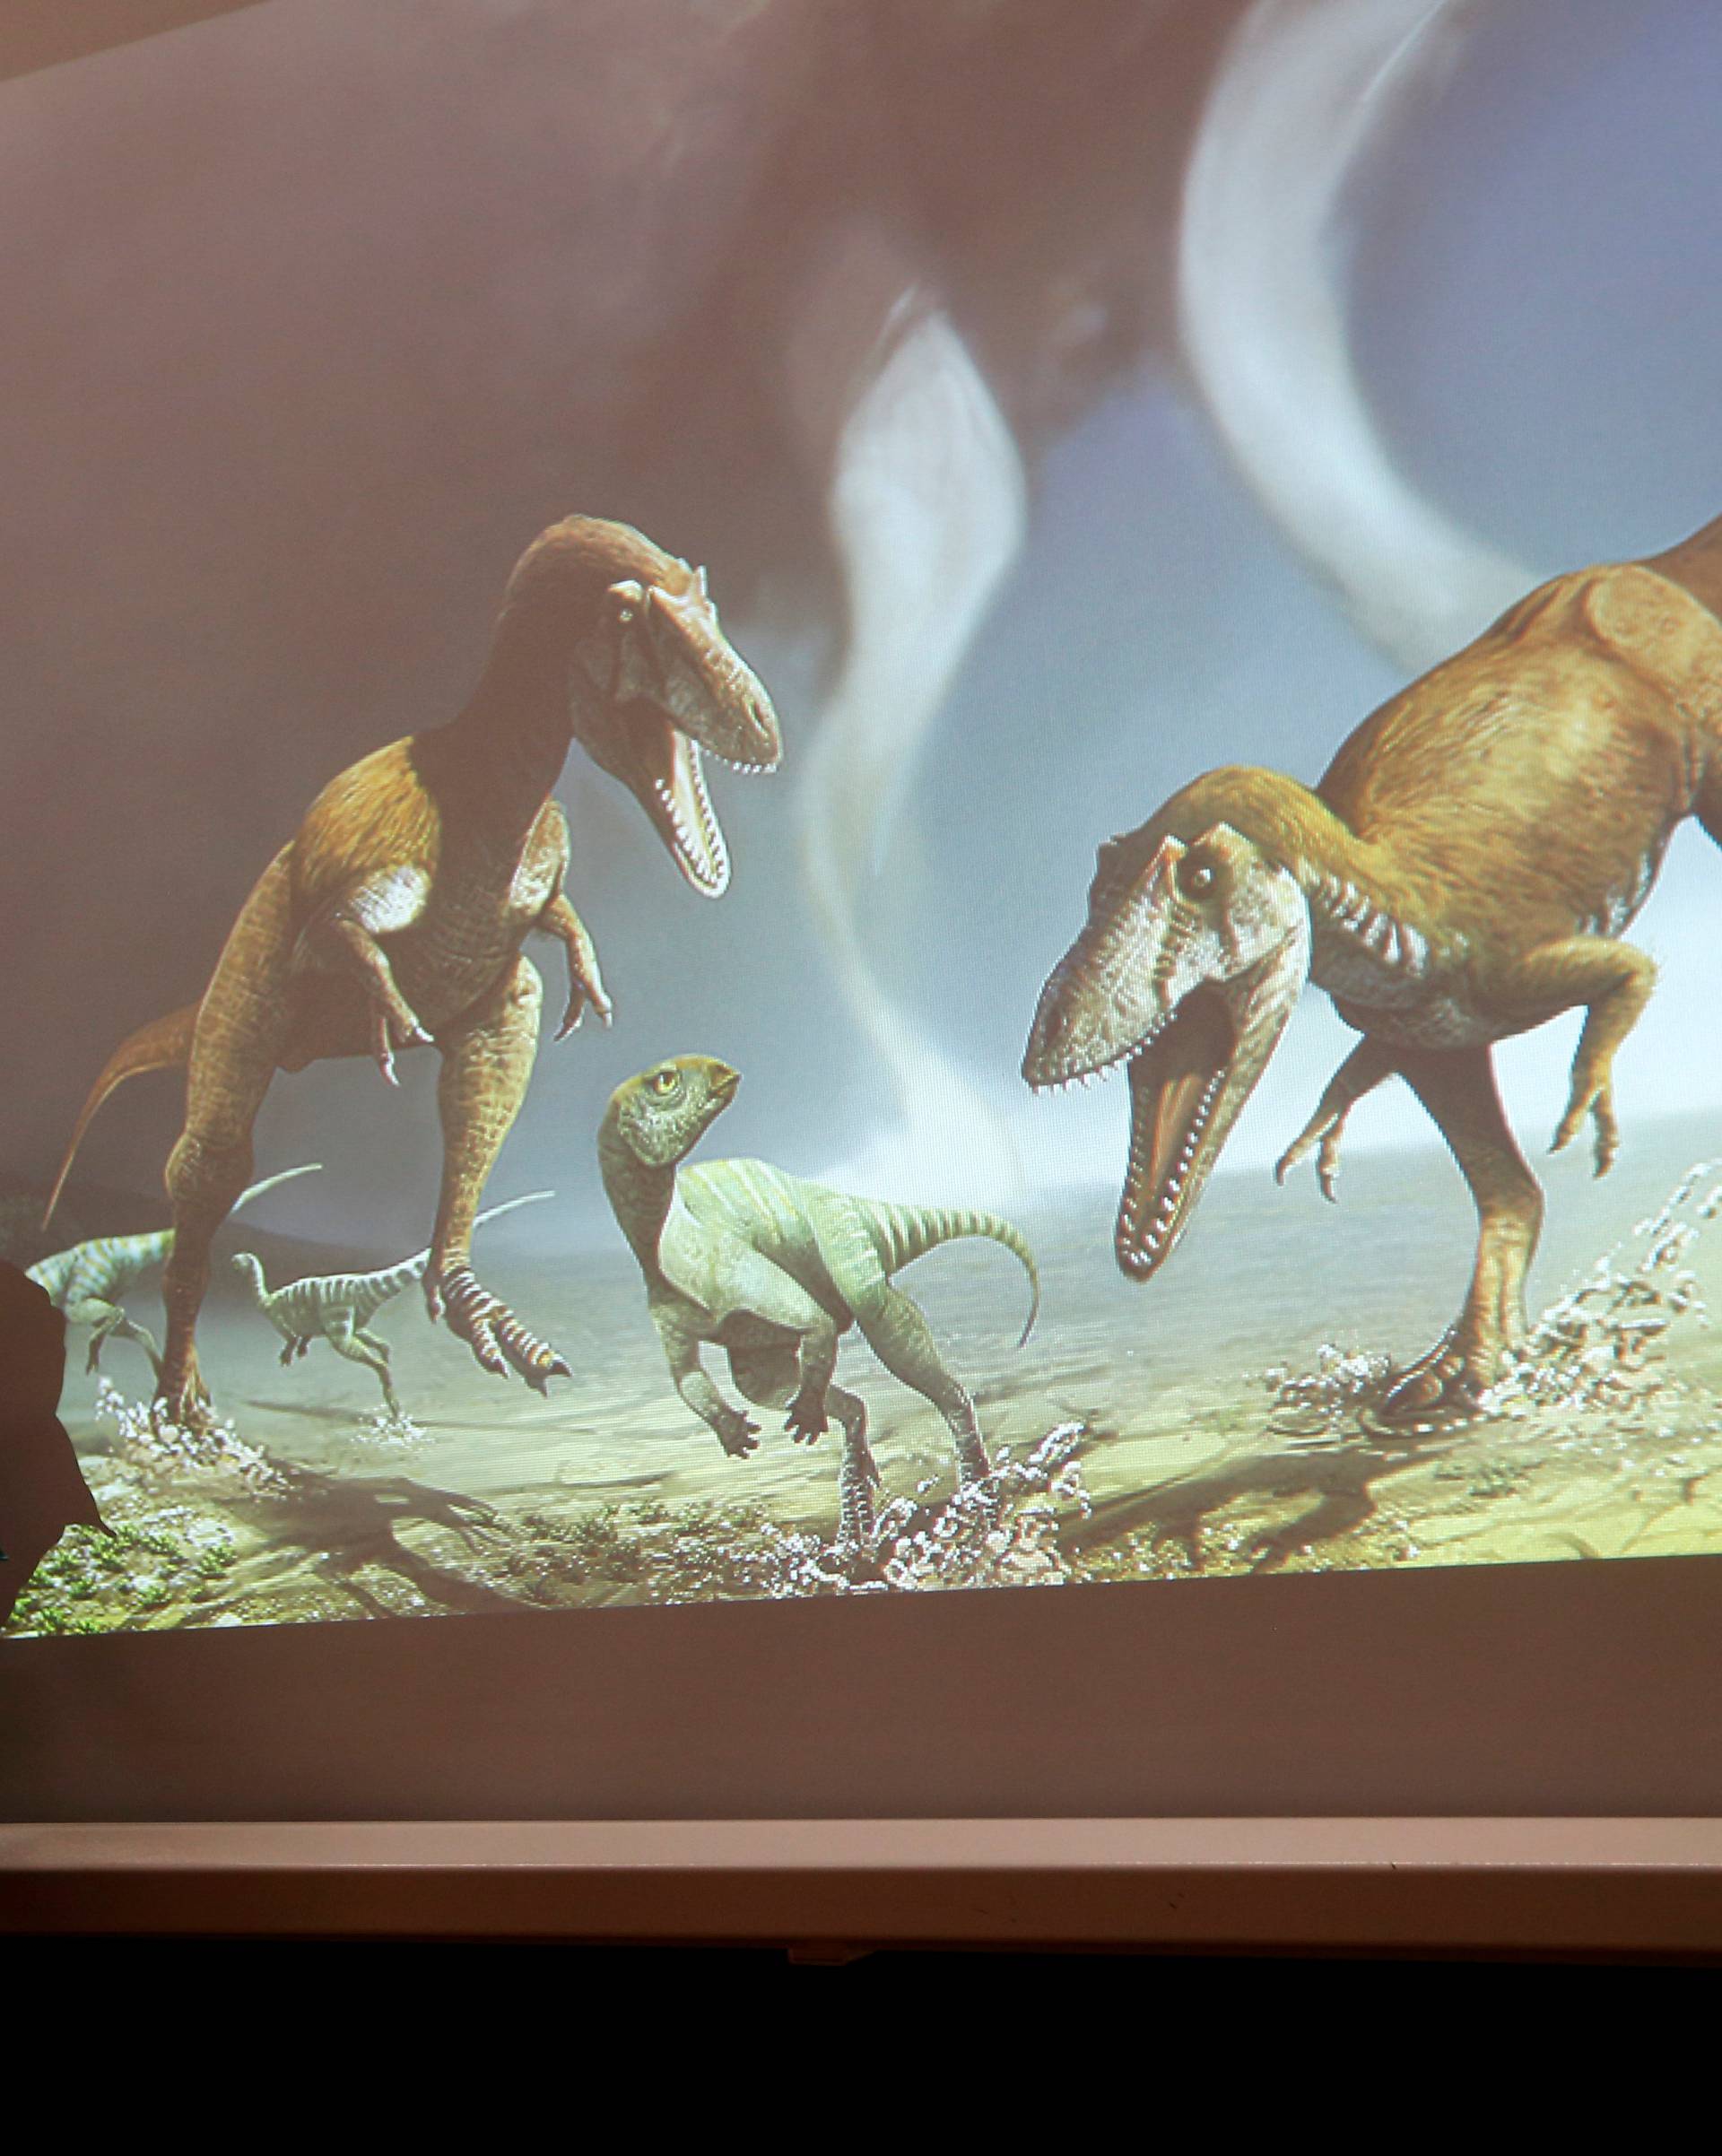 Argentine paleontologist Apesteguia speaks next to a screen showing two Cretaceous Period predatory dinosaurs named Gualicho in northern Patagonia 90 million years ago in Buenos Aires